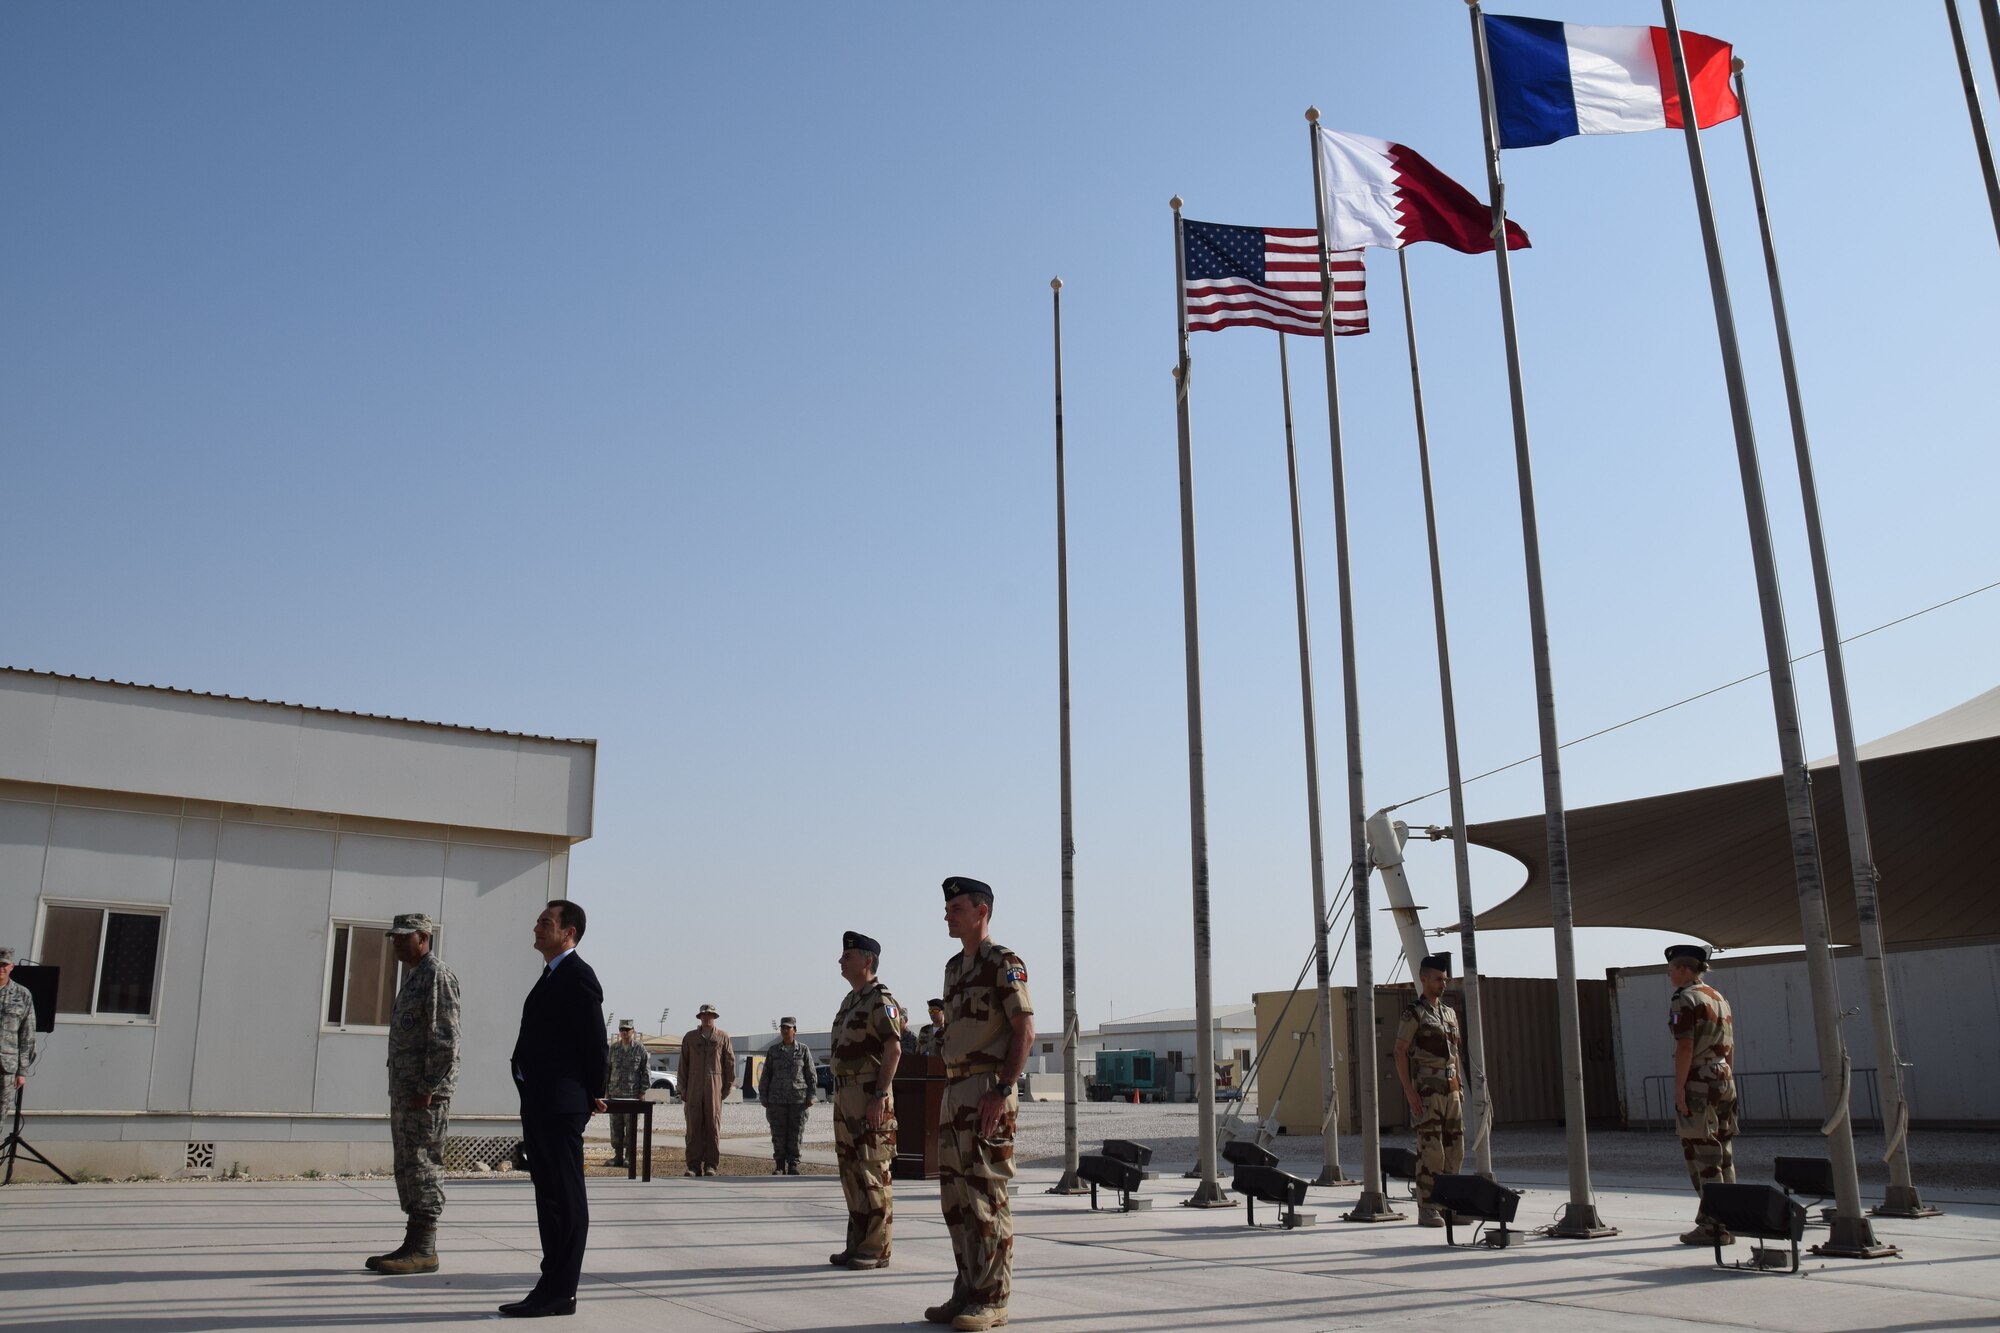 The French national flag, known as the Tricolour, is raised during the Bastille Day ceremony July 14, 2016, at Al Udeid Air Base, Qatar. Lt. Gen. Charles Brown, U.S. Air Forces Central Command commander, and Monsieur Eric Chevallier, Ambassador of France to Qatar, awarded the Air Force Achievement Medal and  French National Defense Medal to French and American military members who have participated in operational activities against Daesh and other terrorist organizations. (U.S. Air Force photo/Technical Sgt. Carlos J. Treviño/Released)
